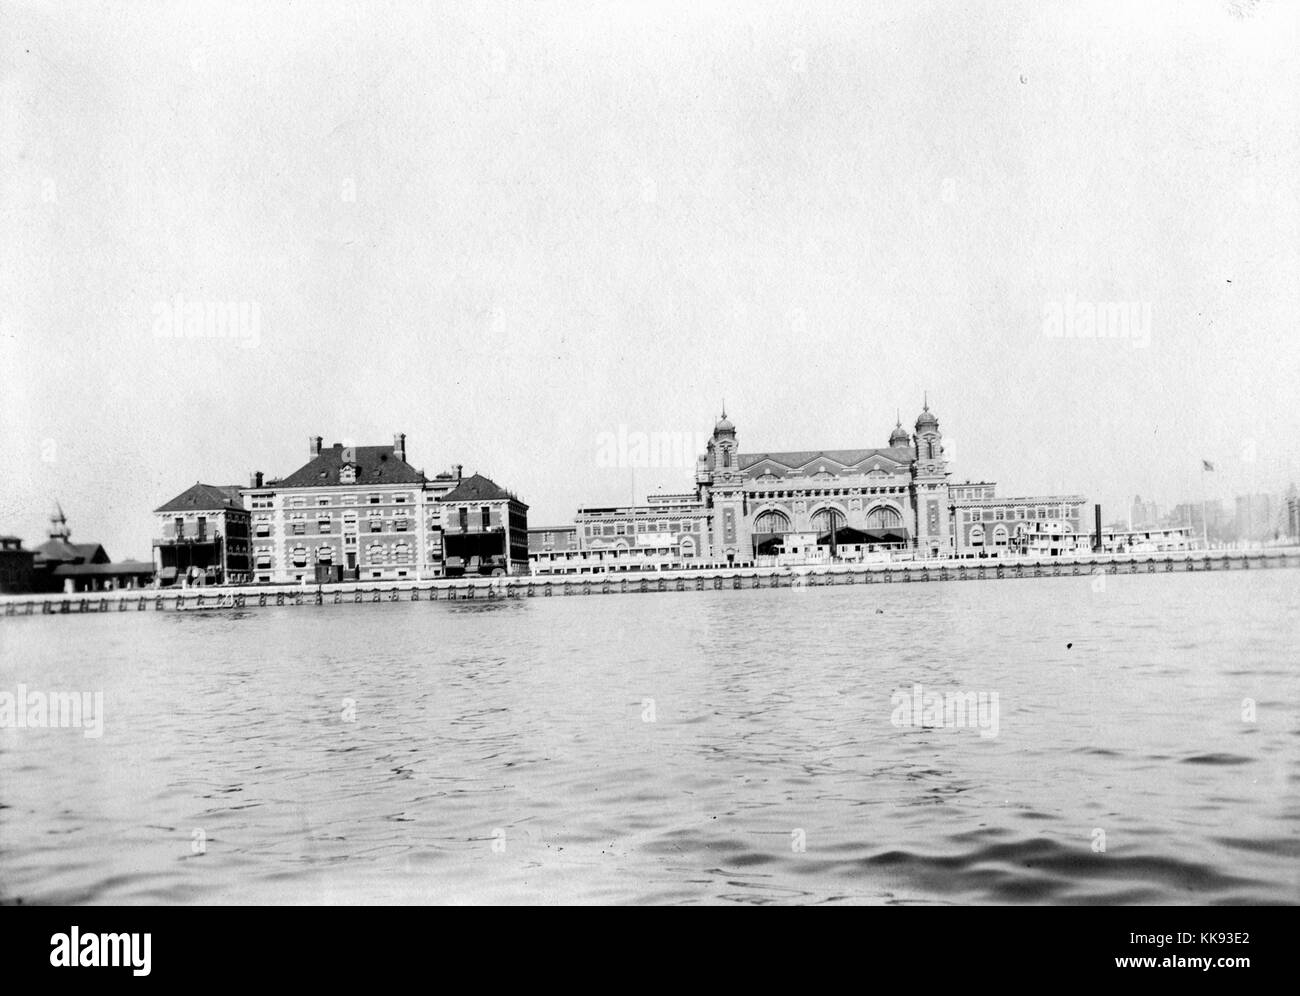 A photograph of Ellis Island taken from the Upper New York Bay, the large building on the left is the hospital building, it was used to treat immigrants who were ill, if they could be cured they were allowed in to the United States otherwise they were sent back to their home country, the sprawling building on the right is the immigration inspection station, between 1892 and 1954 over 12 million immigrants were processed through Ellis Island making it the busiest point of immigration in the country, New York, 1907. From the New York Public Library. Stock Photo